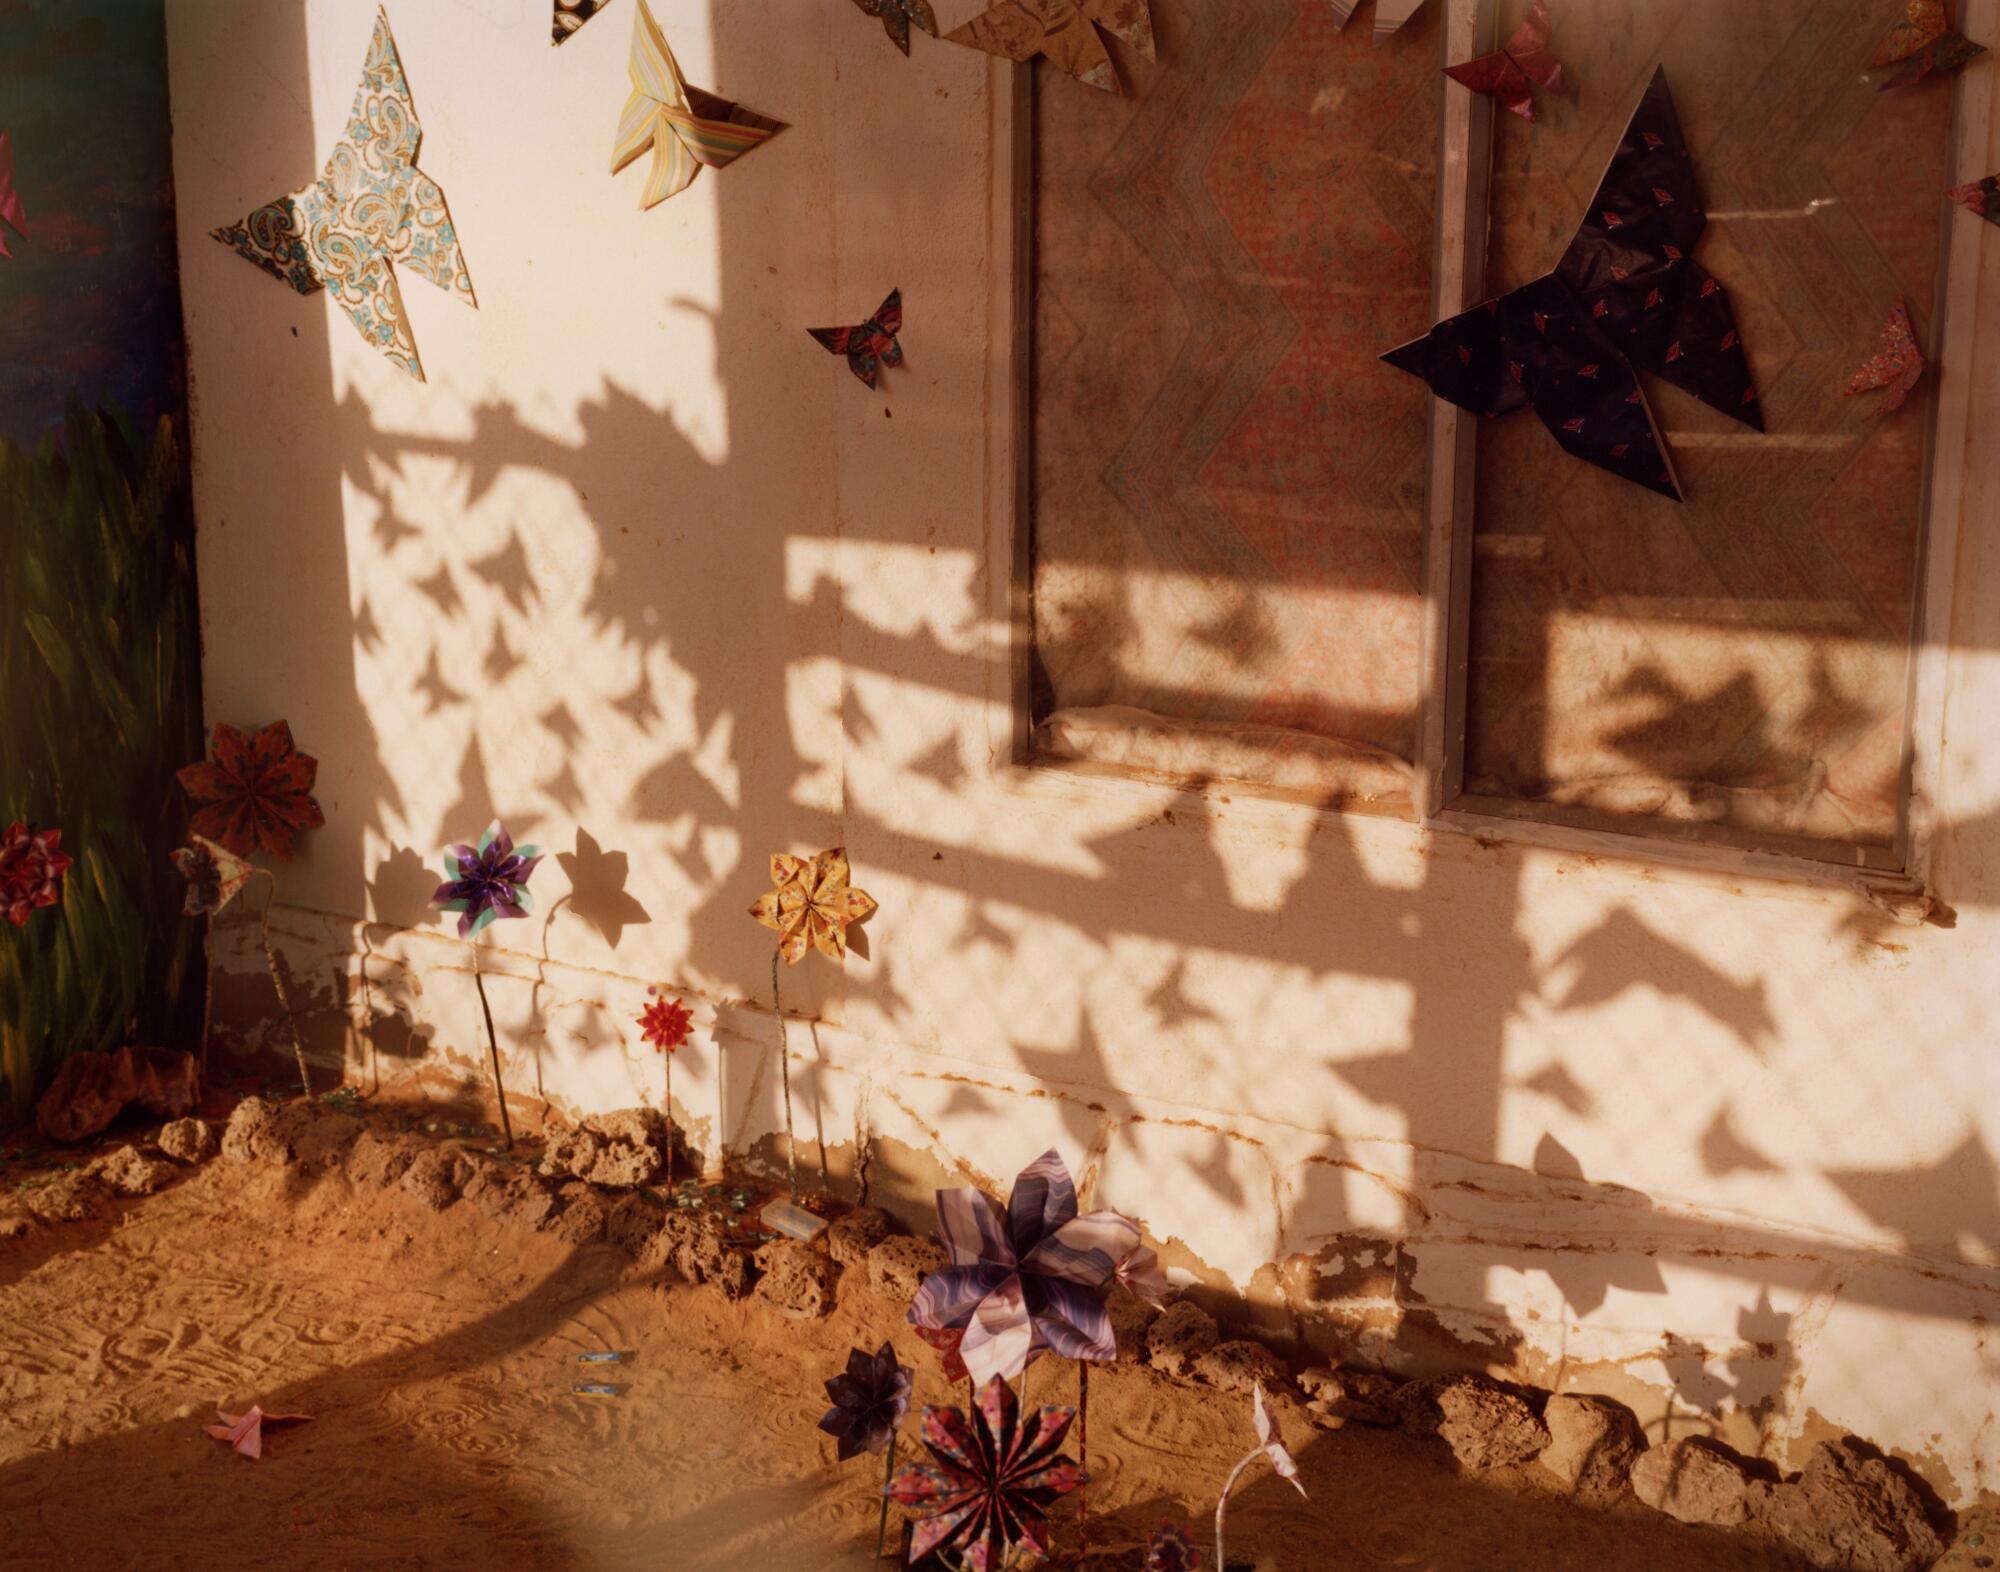 Butterfly shadows and cutouts adorn the front of a building.